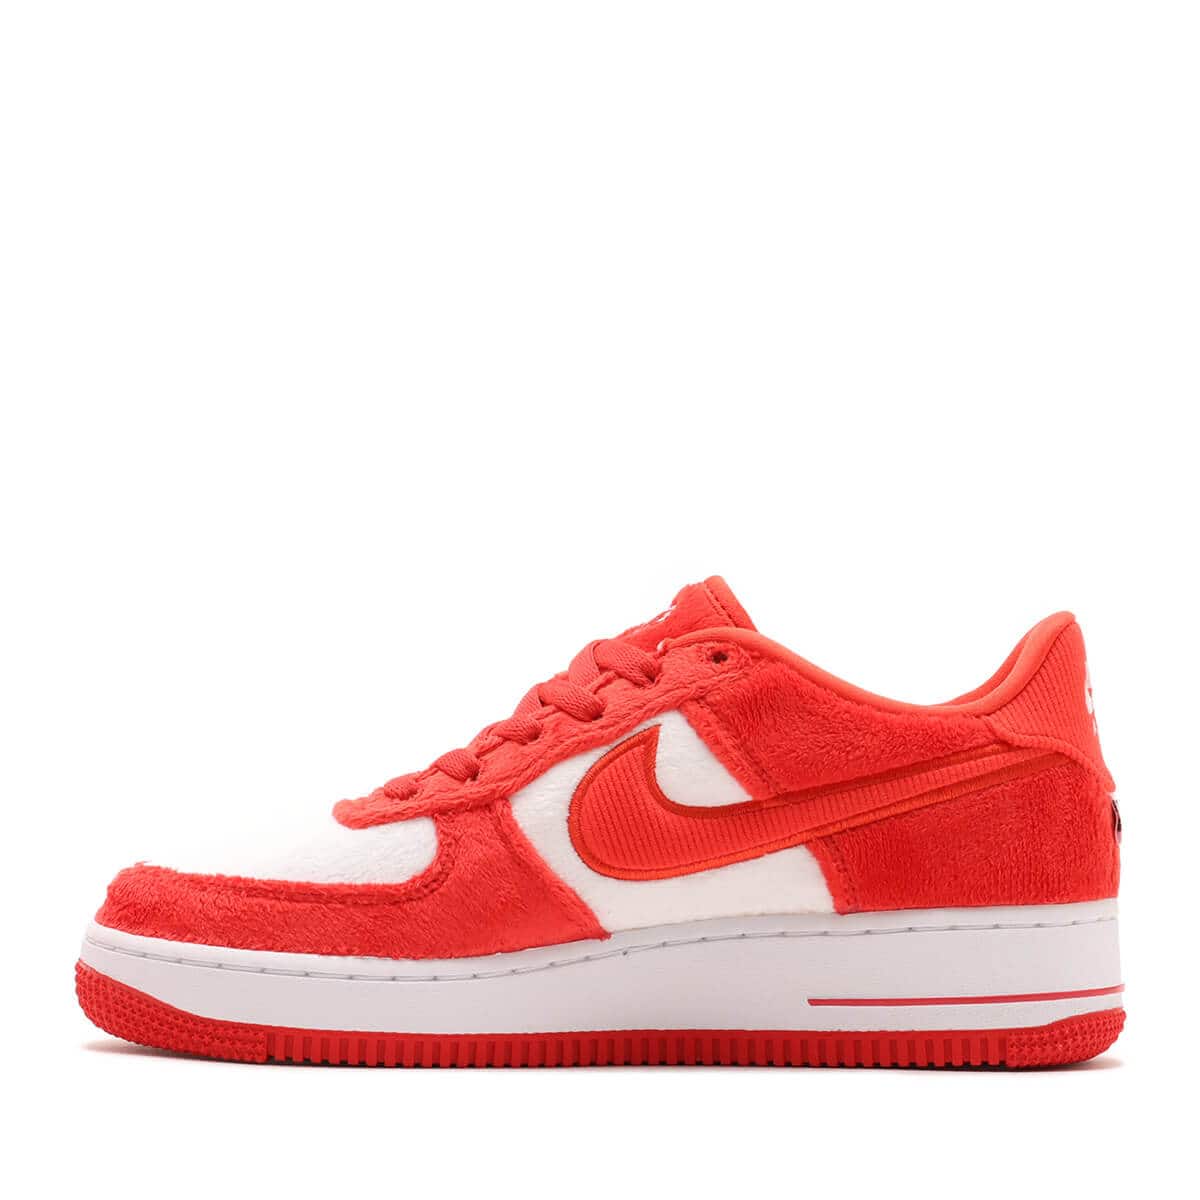 Nike Air Force 1 GS Fire RED/LT CRIMSON-WHITE-PINK Foam - レッド - 24.5cm